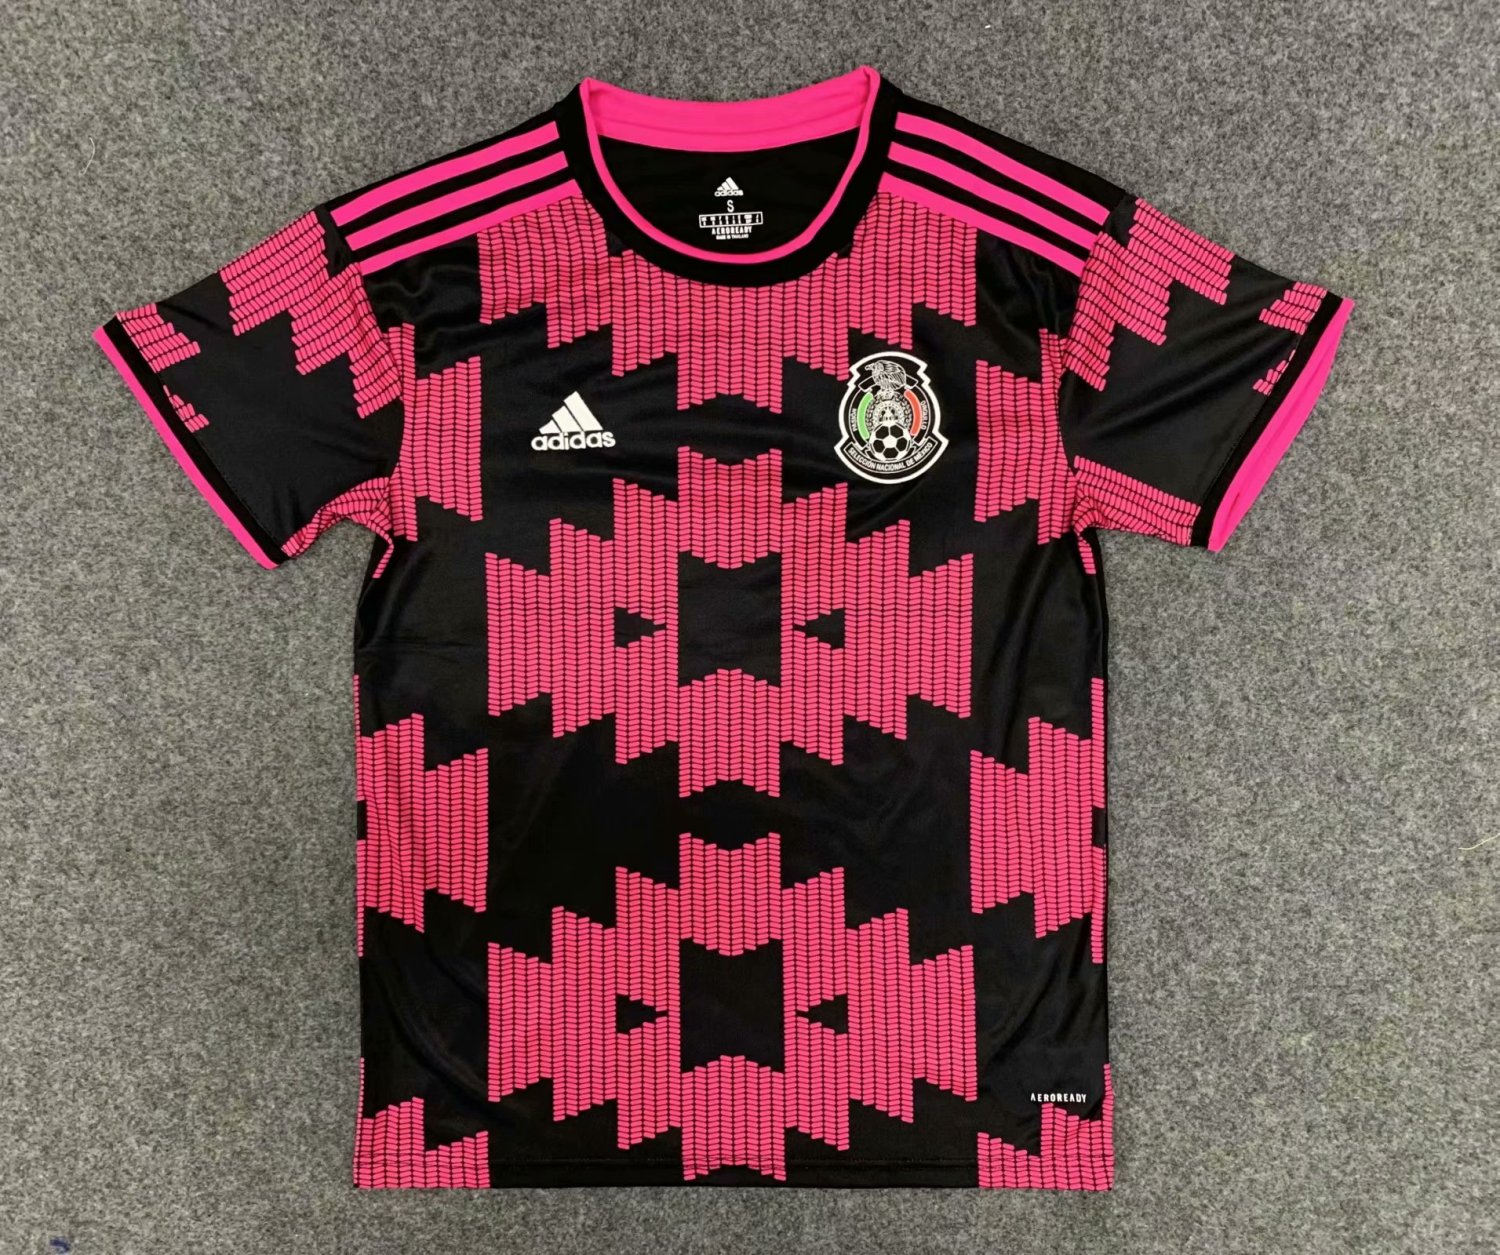 20/21 New Adult Thai Quality Mexico pink black national soccer jersey